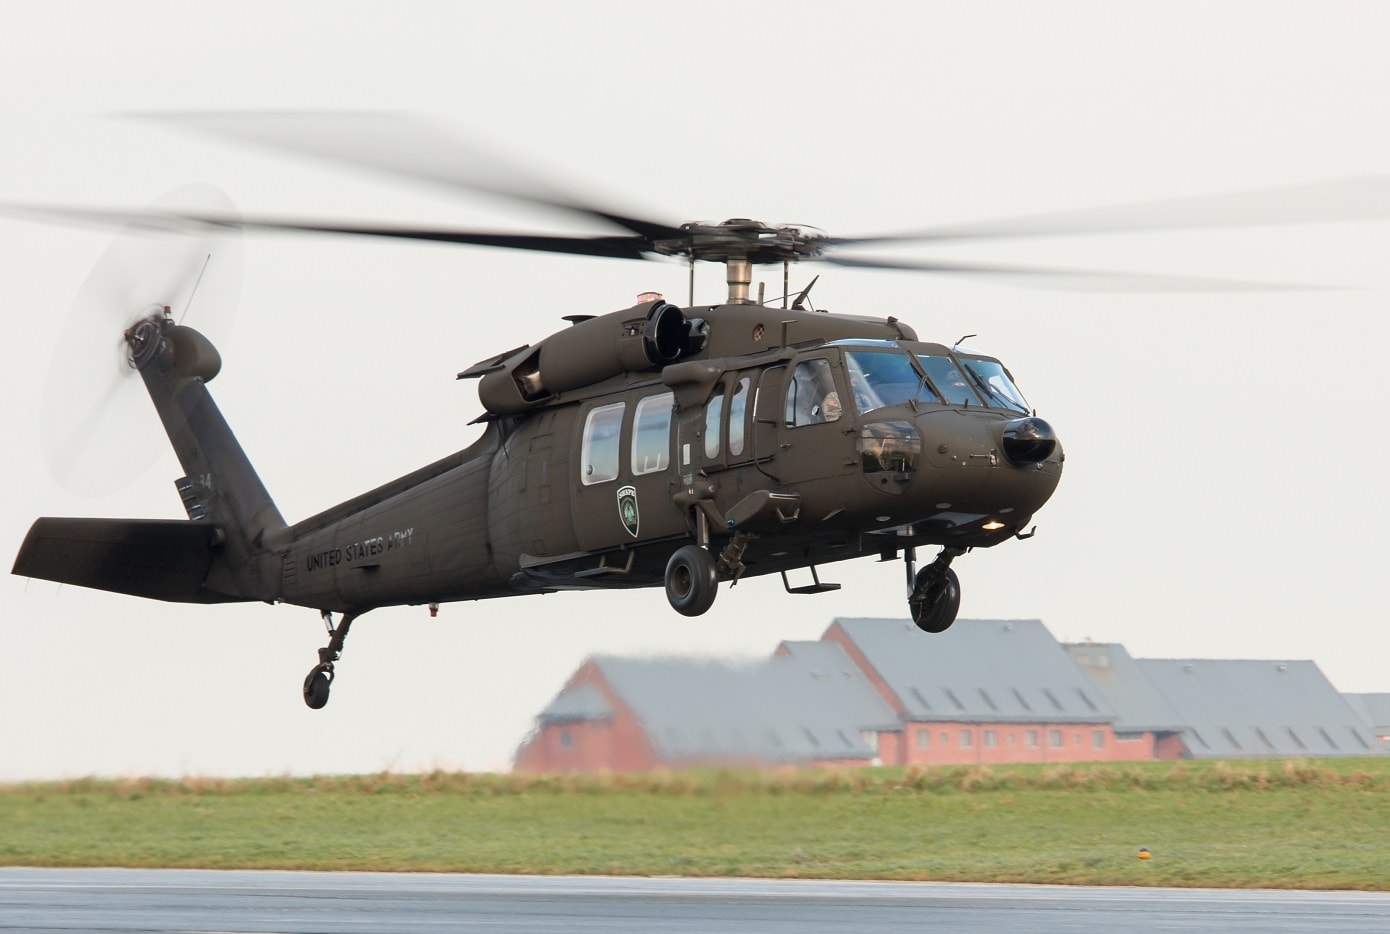 U.S. Army to get rid of all its UH60A Black Hawk helicopters by 2024